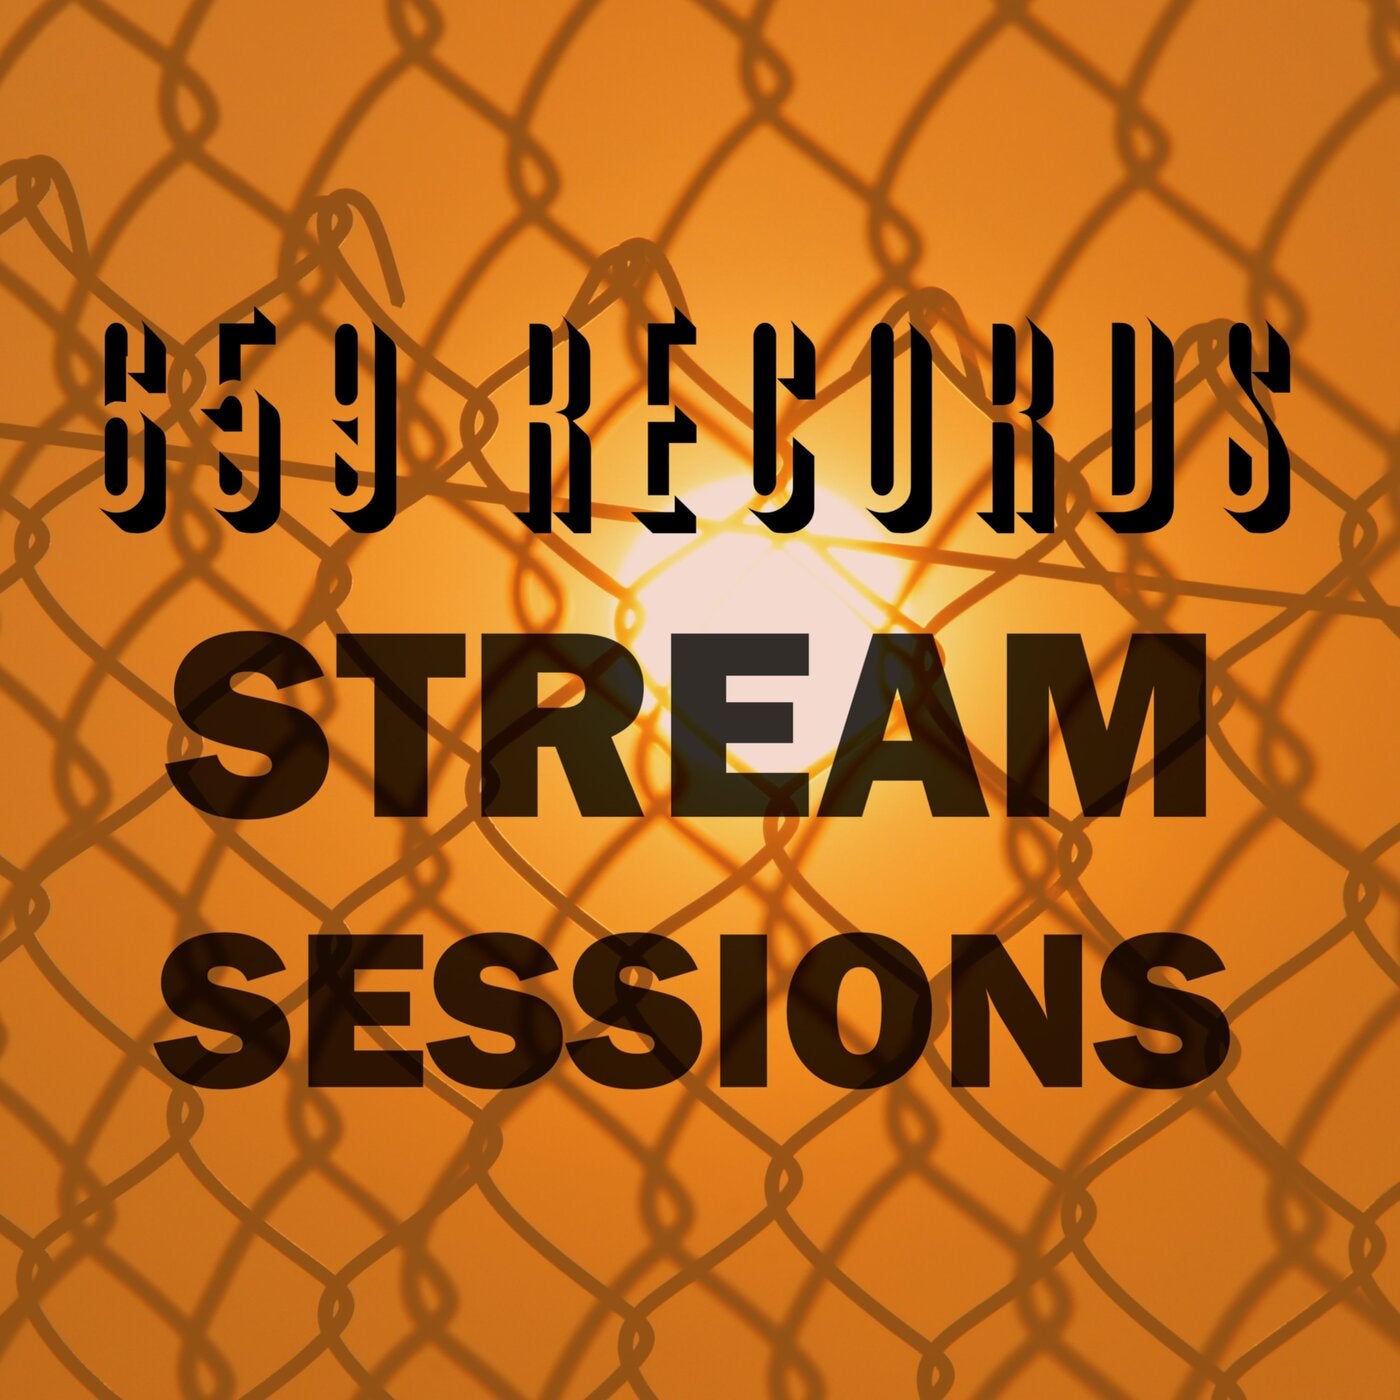 659 Records Stream Sessions